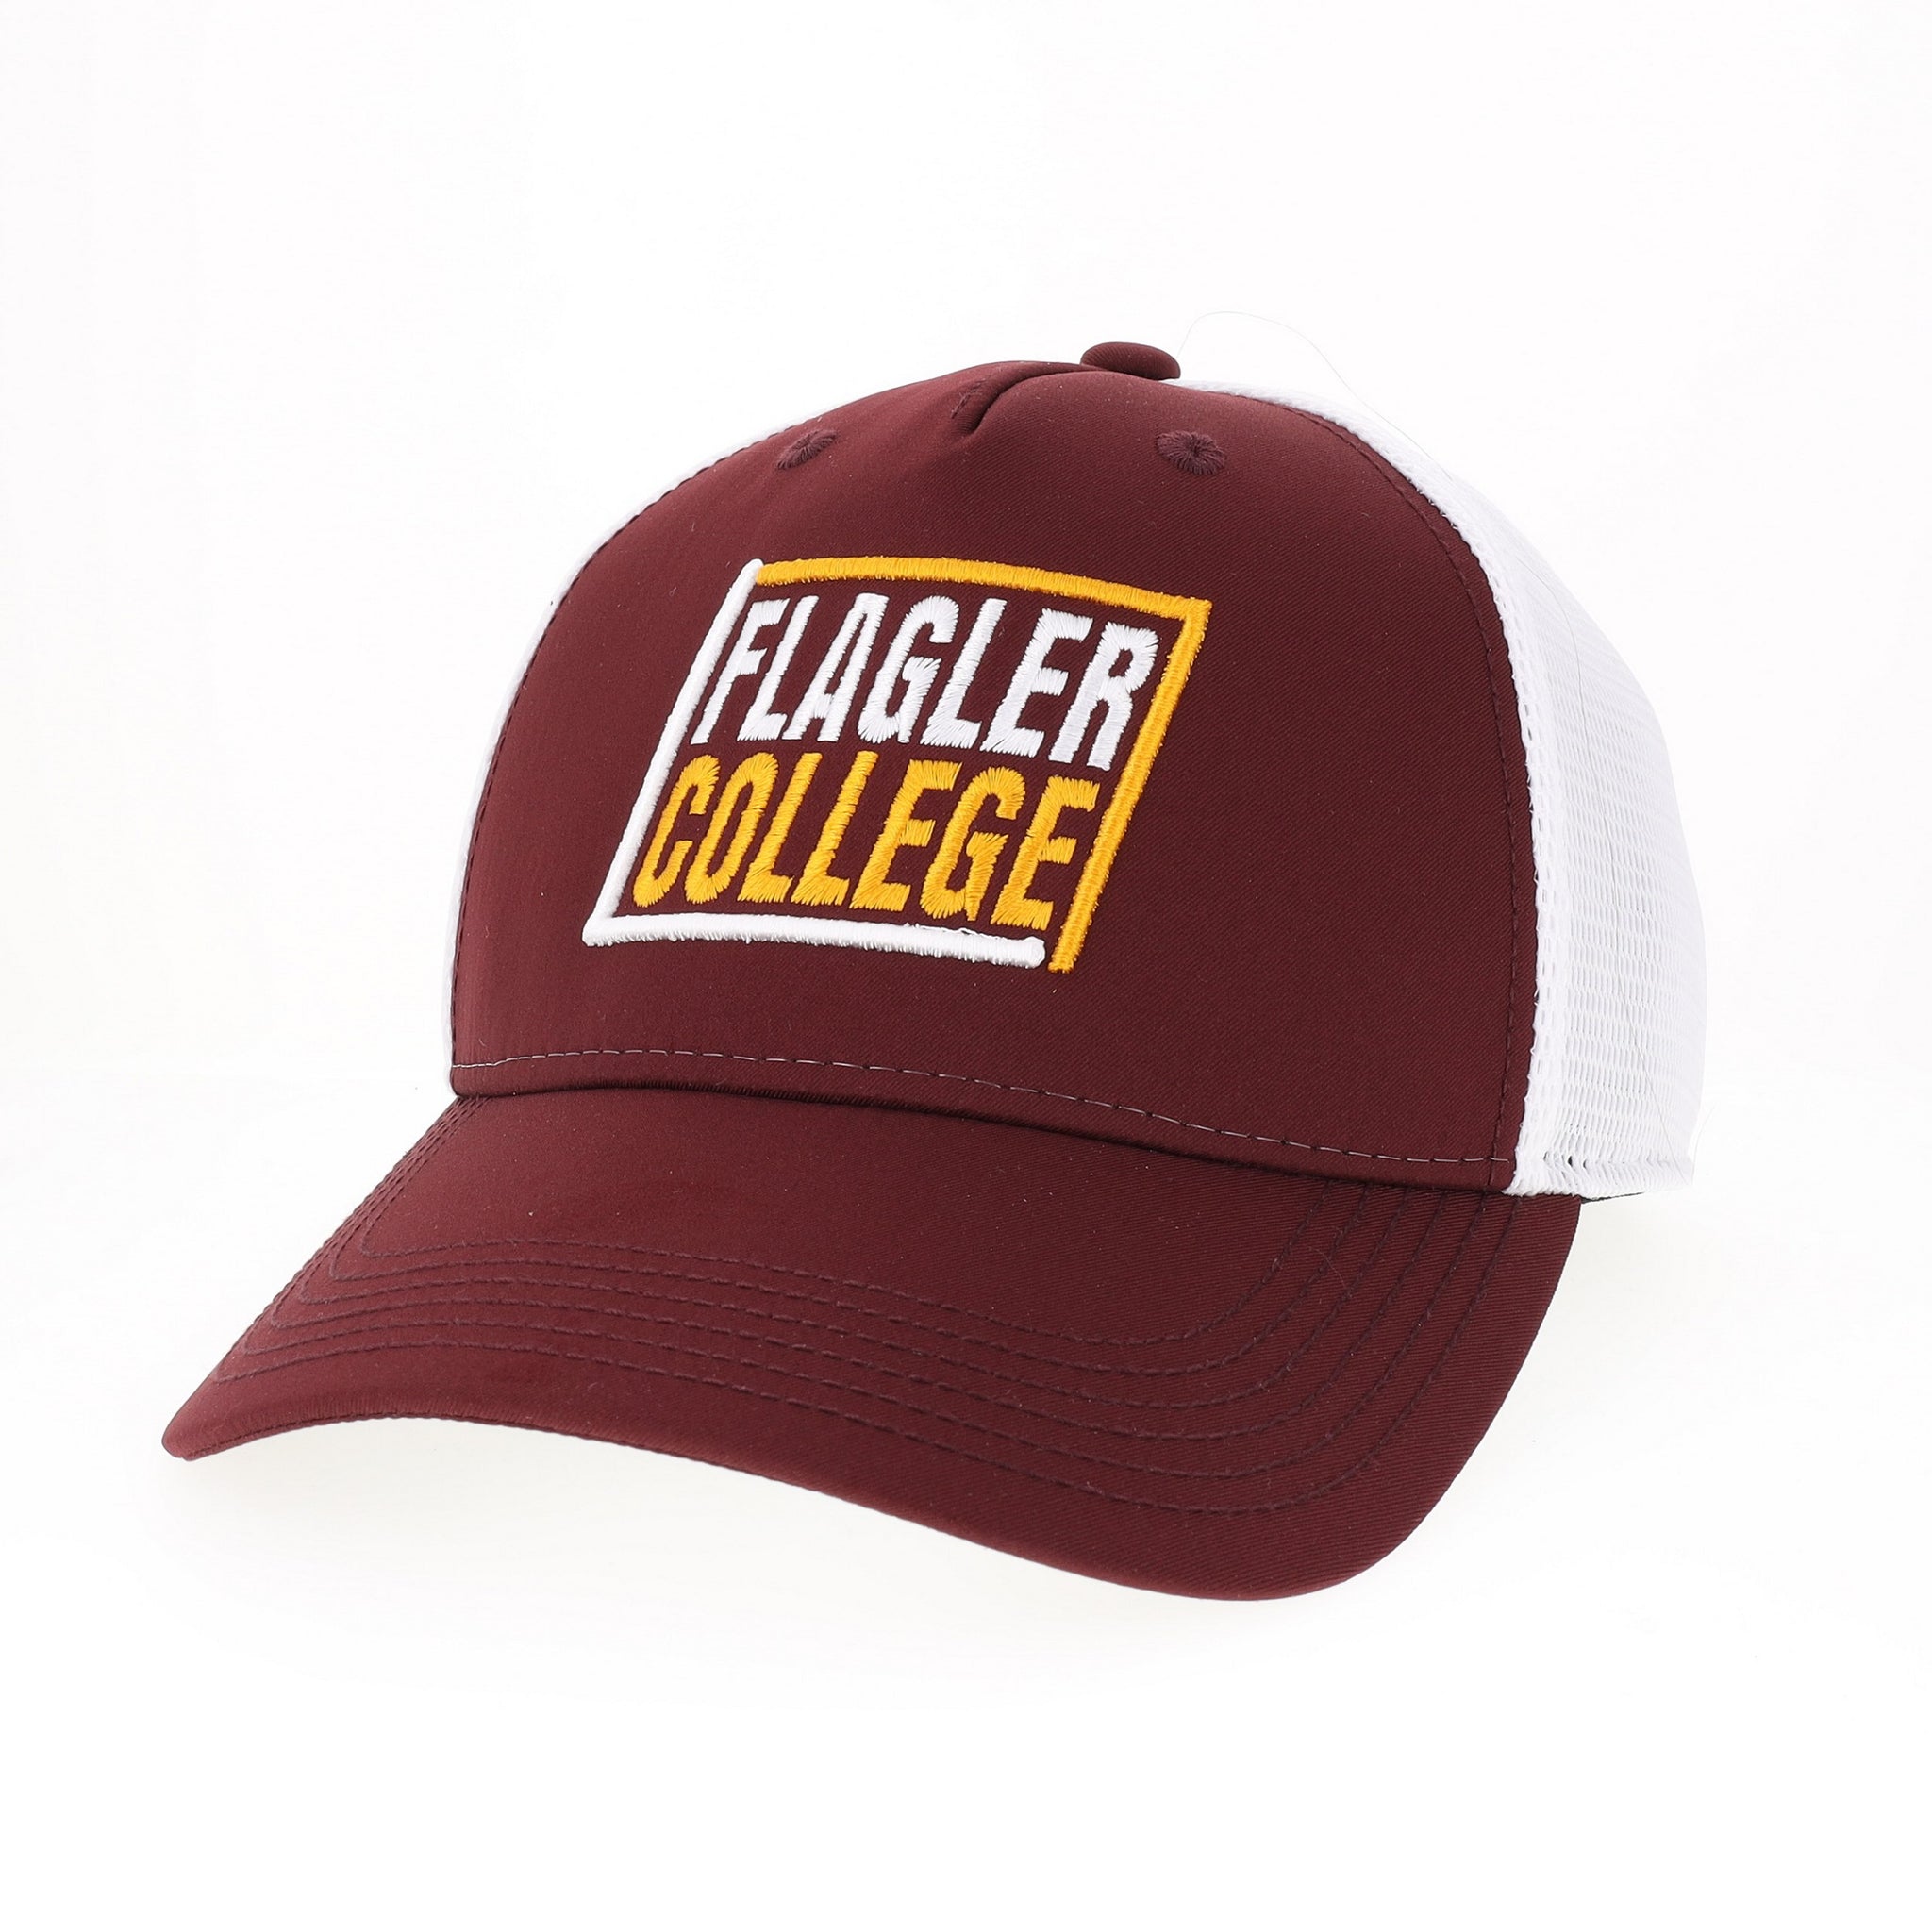 Burgundy hat with white mesh back. White and yellow slanted rectangle with white letters saying Flagler over yellow letters saying college in rectangle